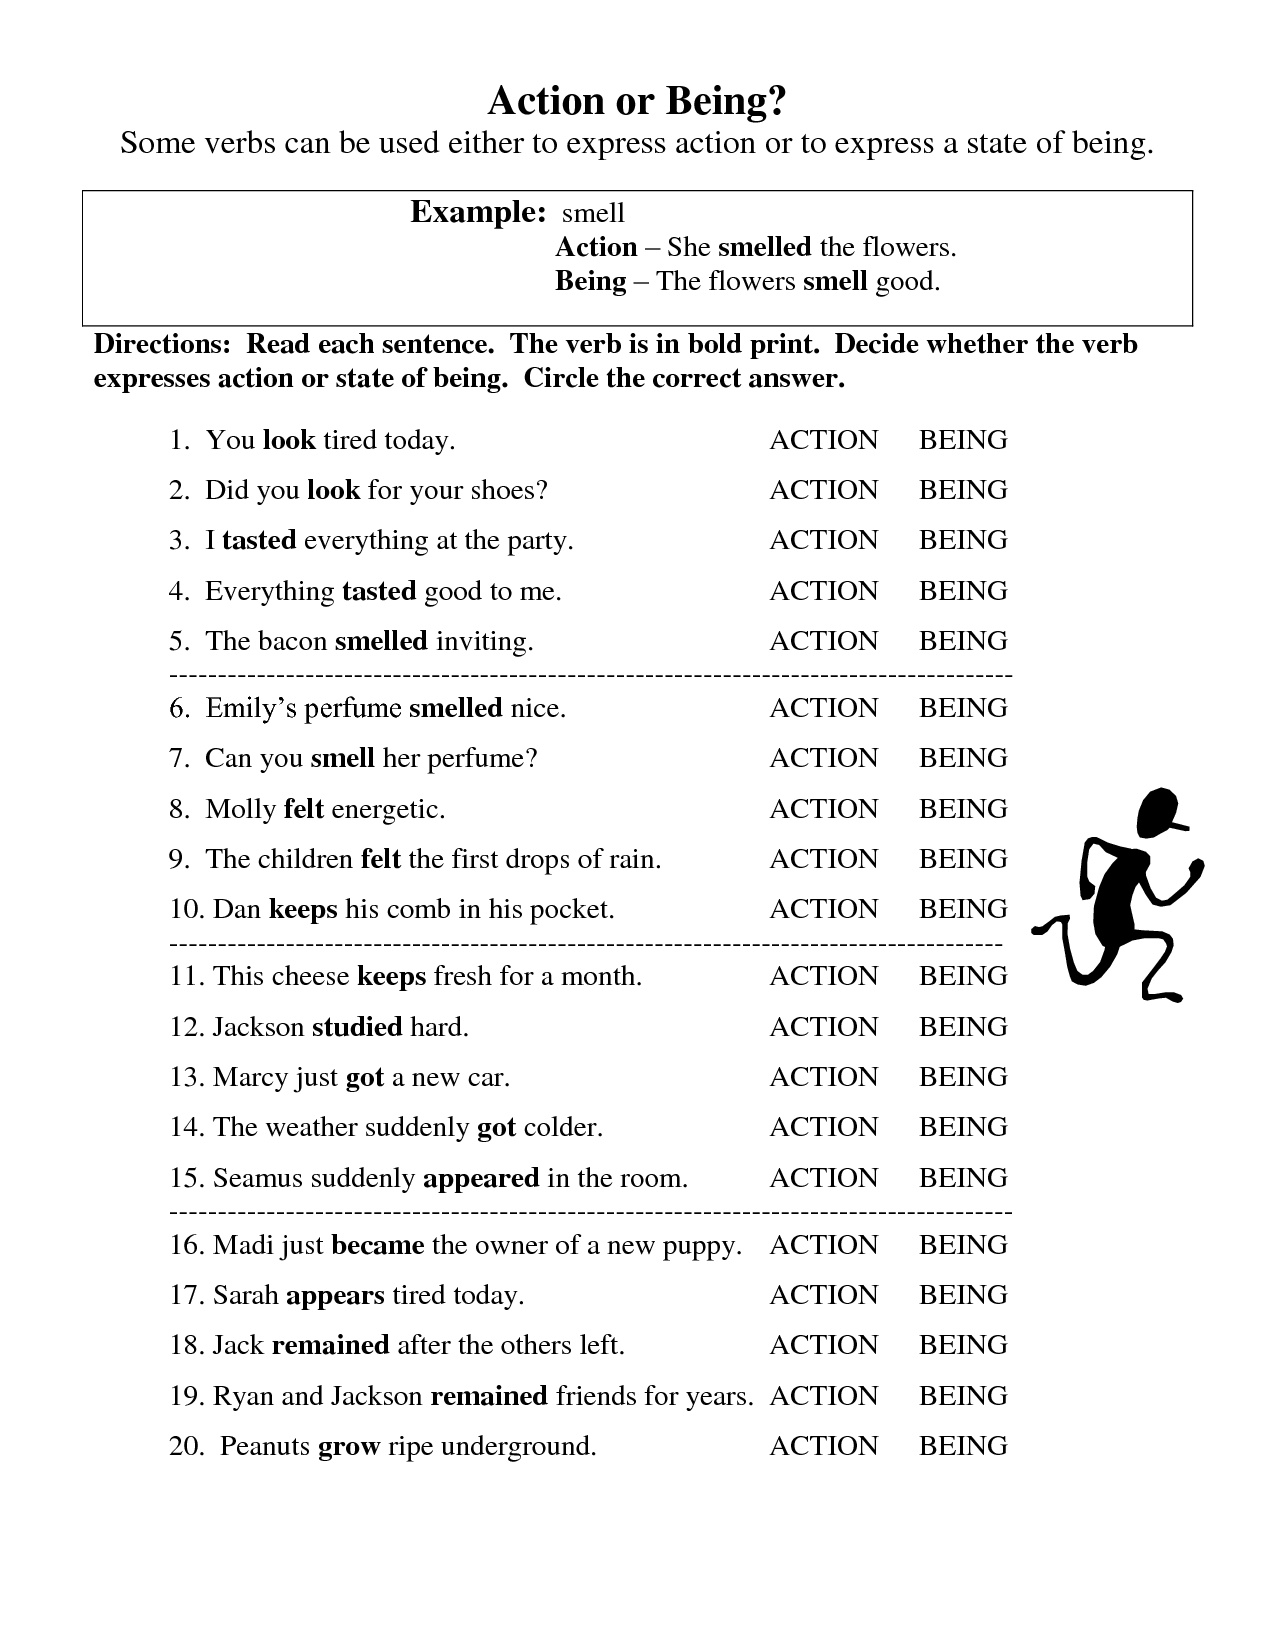 action-linking-verbs-worksheets-k5-learning-action-verbs-and-linking-verbs-worksheet-k5